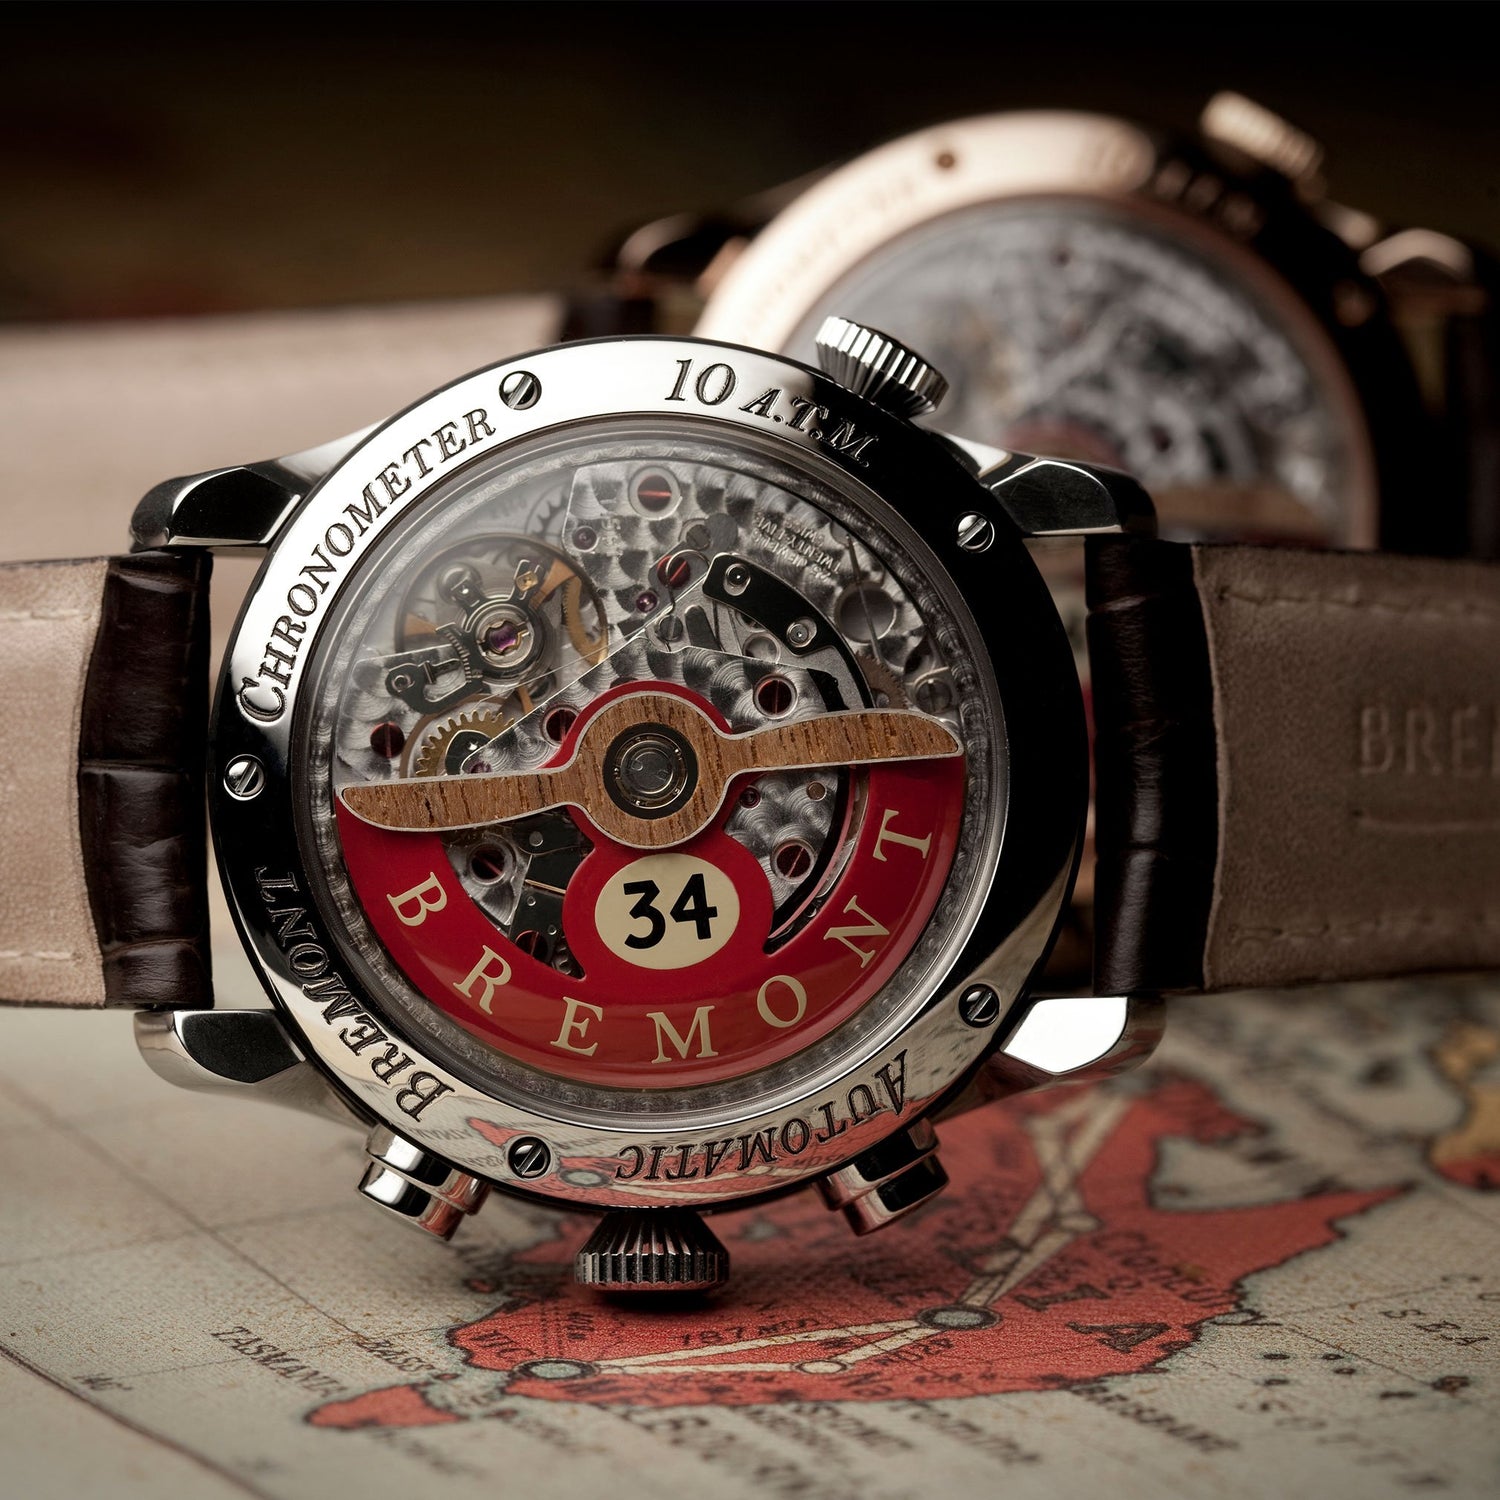 Bremont Chronometers Watches | Mens | DH-88 | LTD | ARCHIVE Limited Edition DH-88